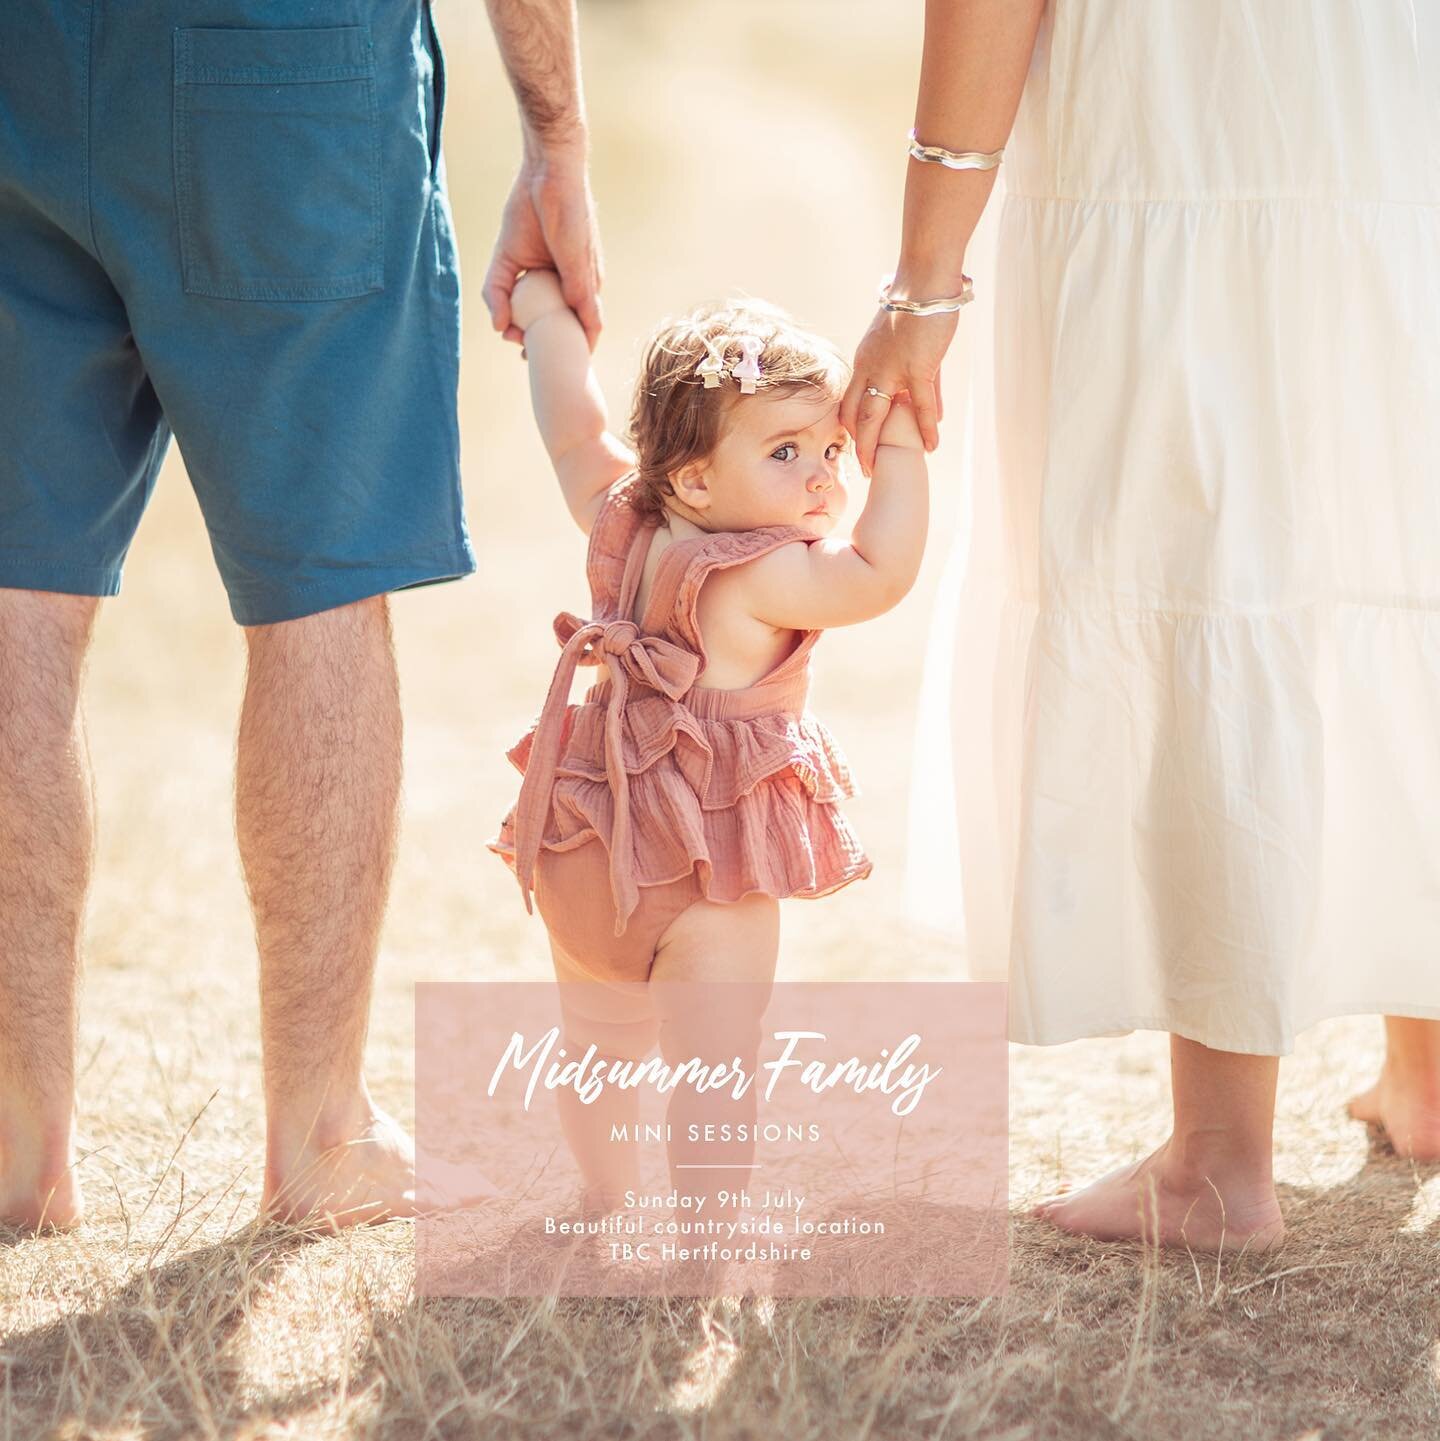 Midsummer Family | Mini Sessions | Sunday  9th July 2023

Super fun, loving and relaxed mini sessions! 

Booking now, scroll for full details | sessions limited | link in bio

#summer #familyminisession #countryside #minishoot #ashridge #hertfordshir